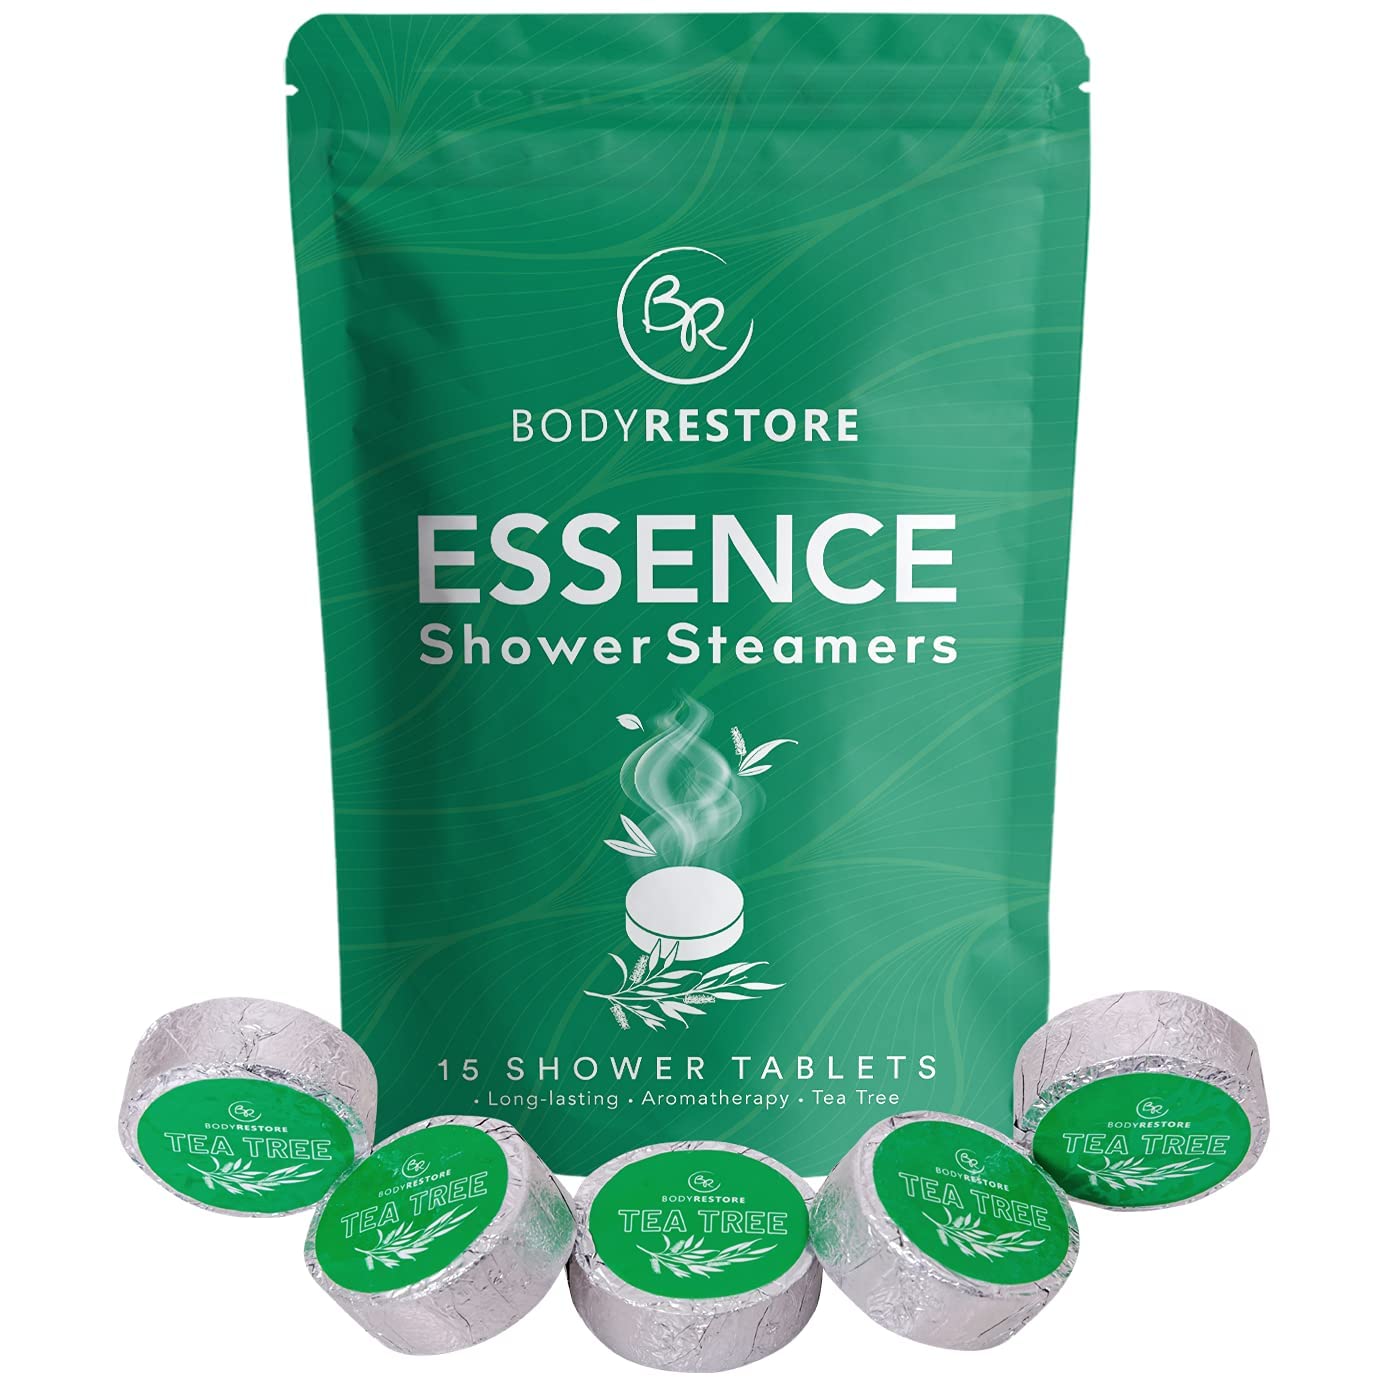 BodyRestore Shower Steamers Gift Set - 30 Aromatherapy Bombs for Women,  Variety Pack of 10 Unique Tablets, Essential Oil Stress Relief and  Relaxation Bath Gifts for Women and Men…